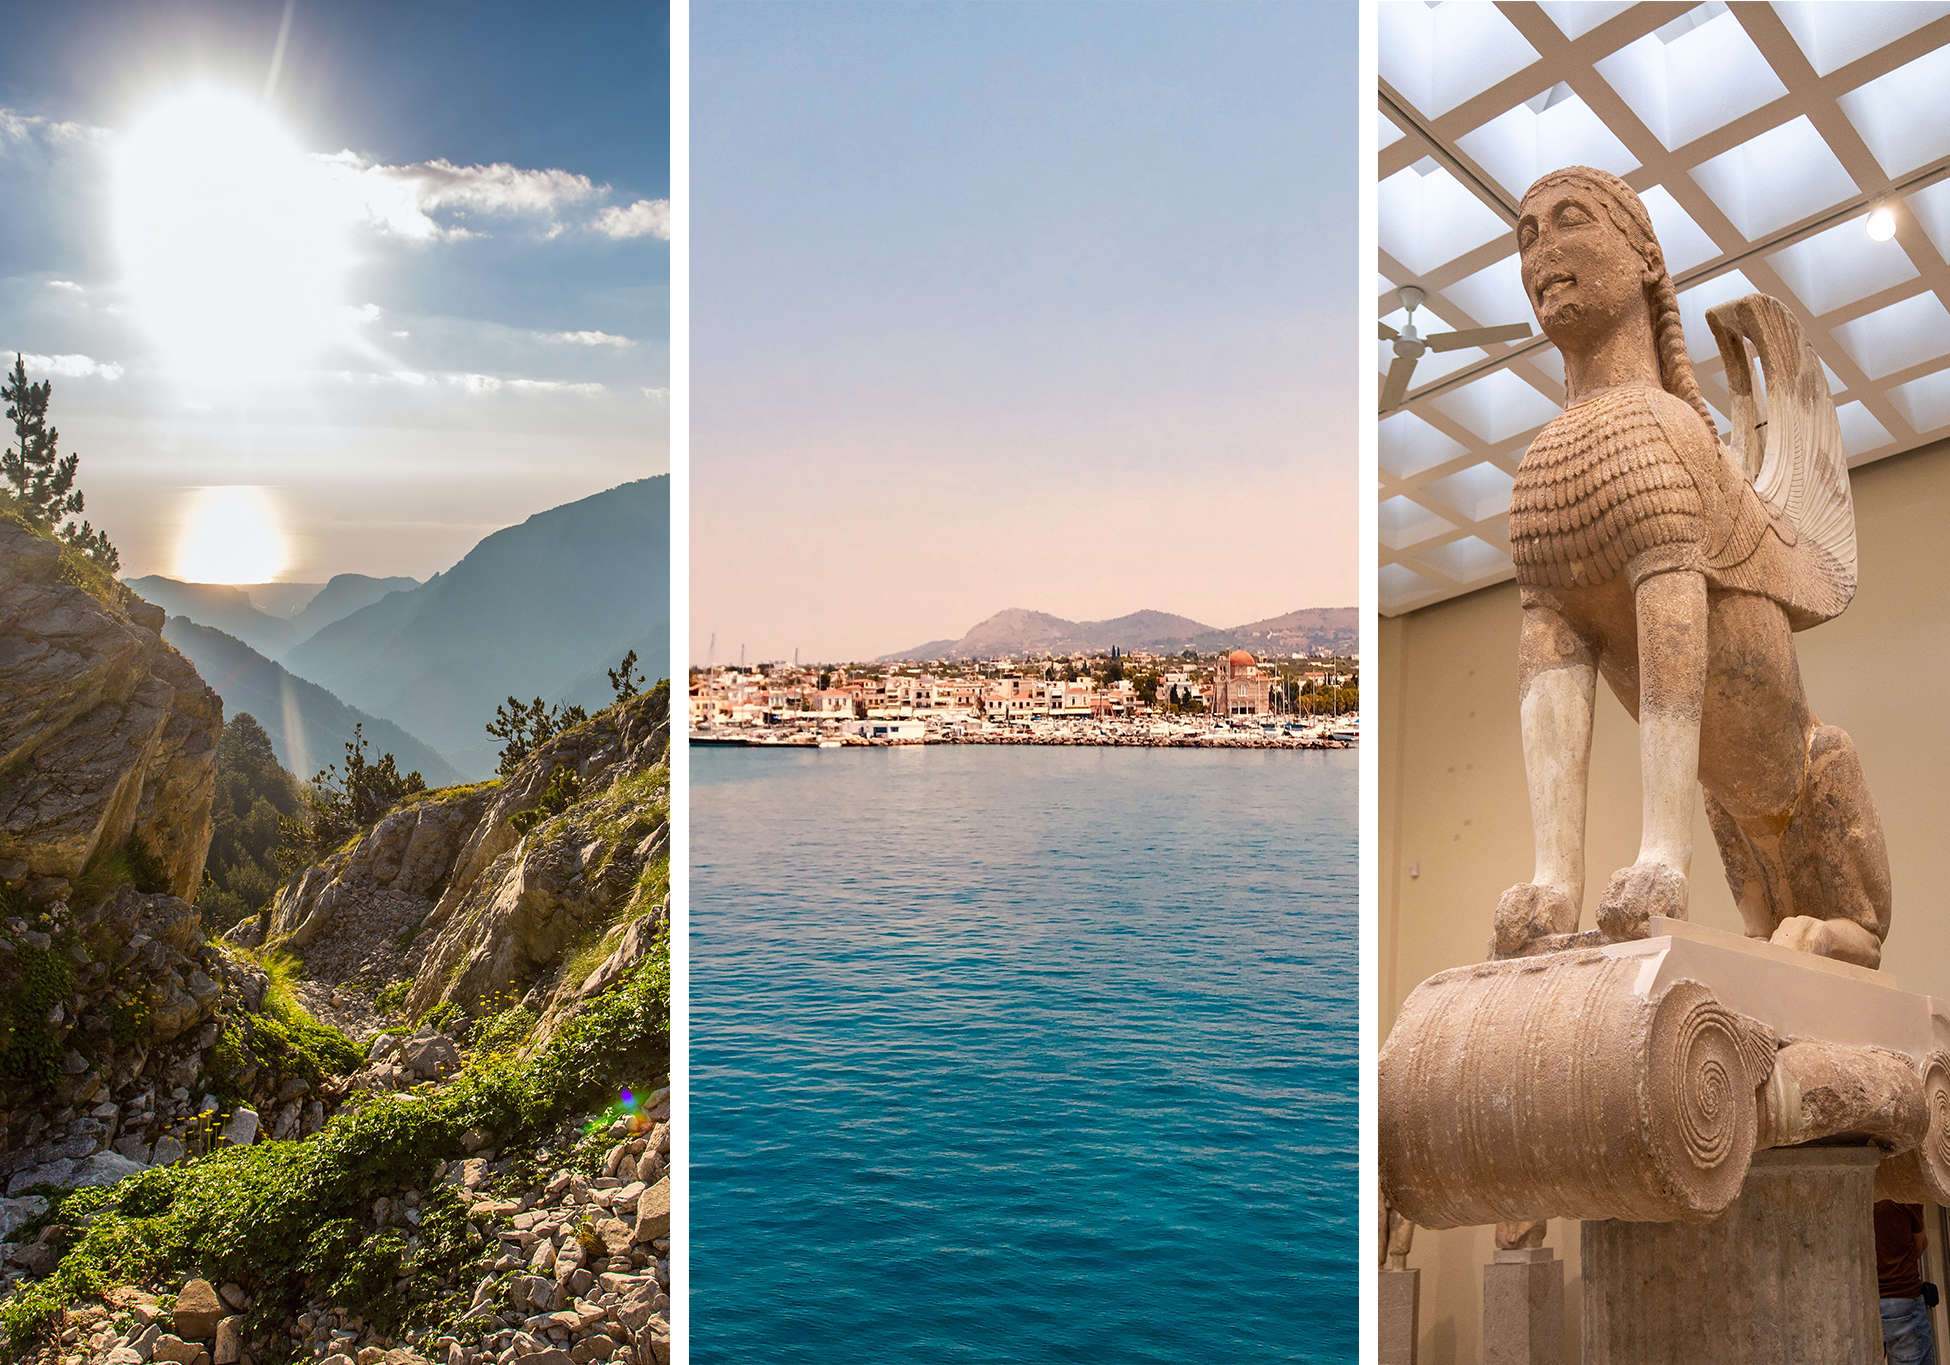 Explore the best that Greece has to offer with these 14 best day trips from Athens to see ancient ruins, spectacular scenery, and the beautiful Aegean Sea